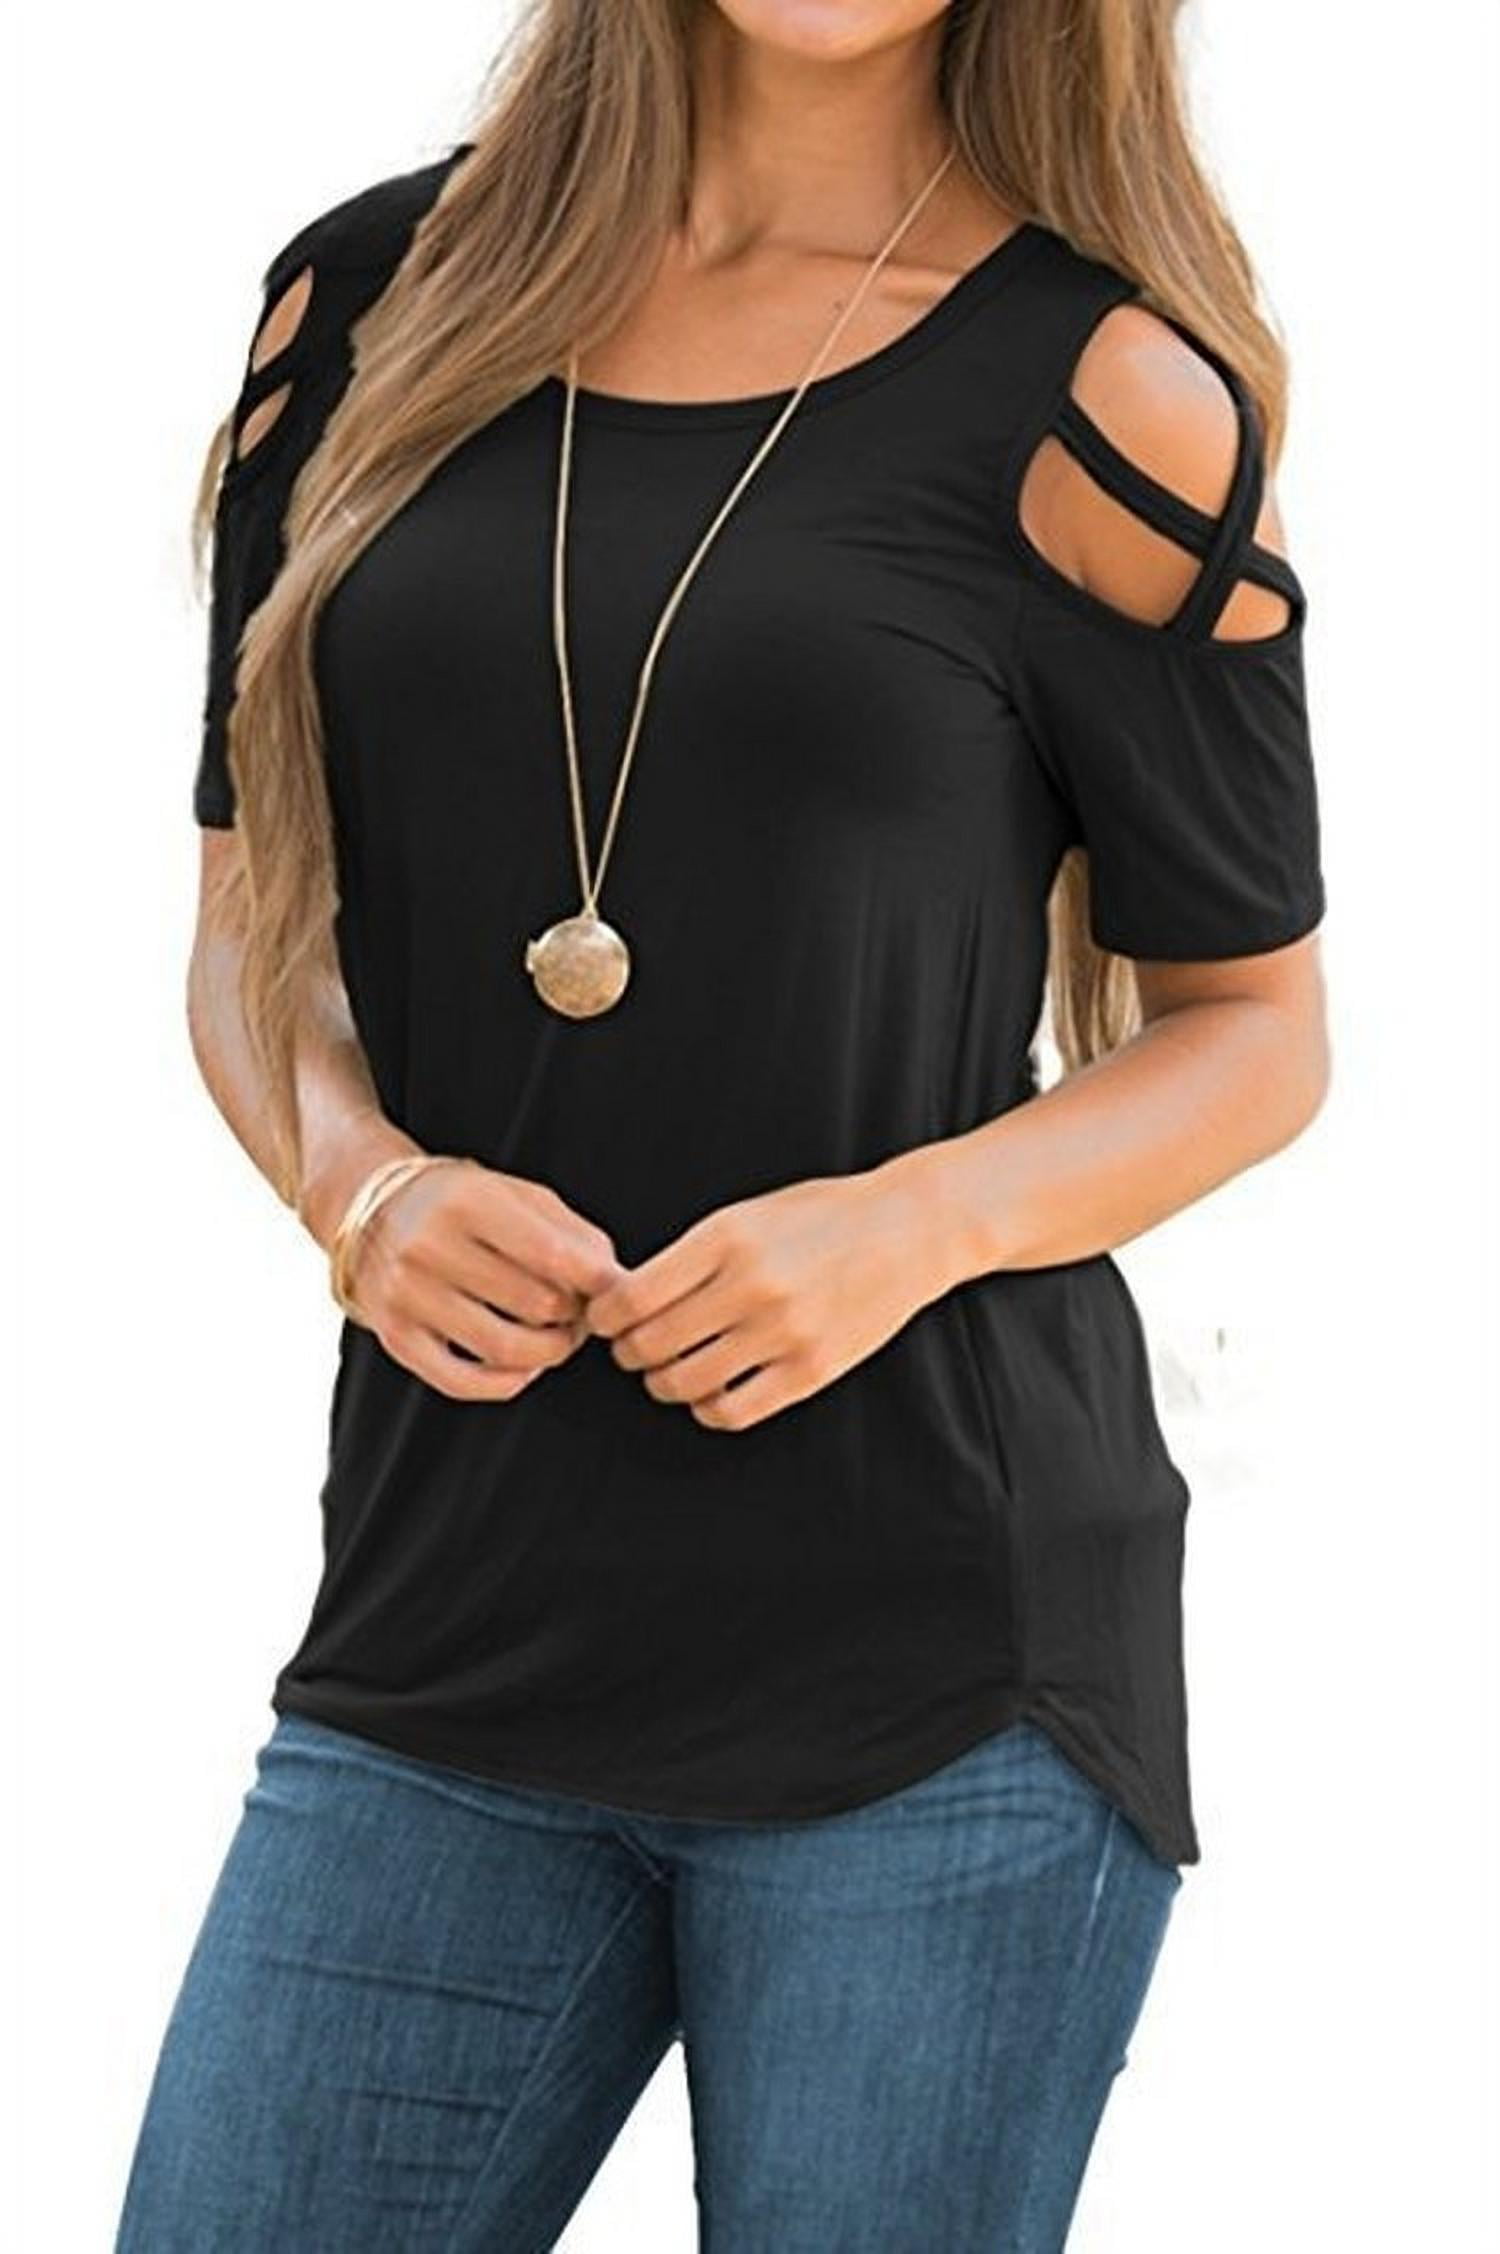 Women Short Sleeve V Neck Tops Hollow Out Casual Tunic Solid Blouse Tops Summer Lace Tee Tops Womens Summer Tops 